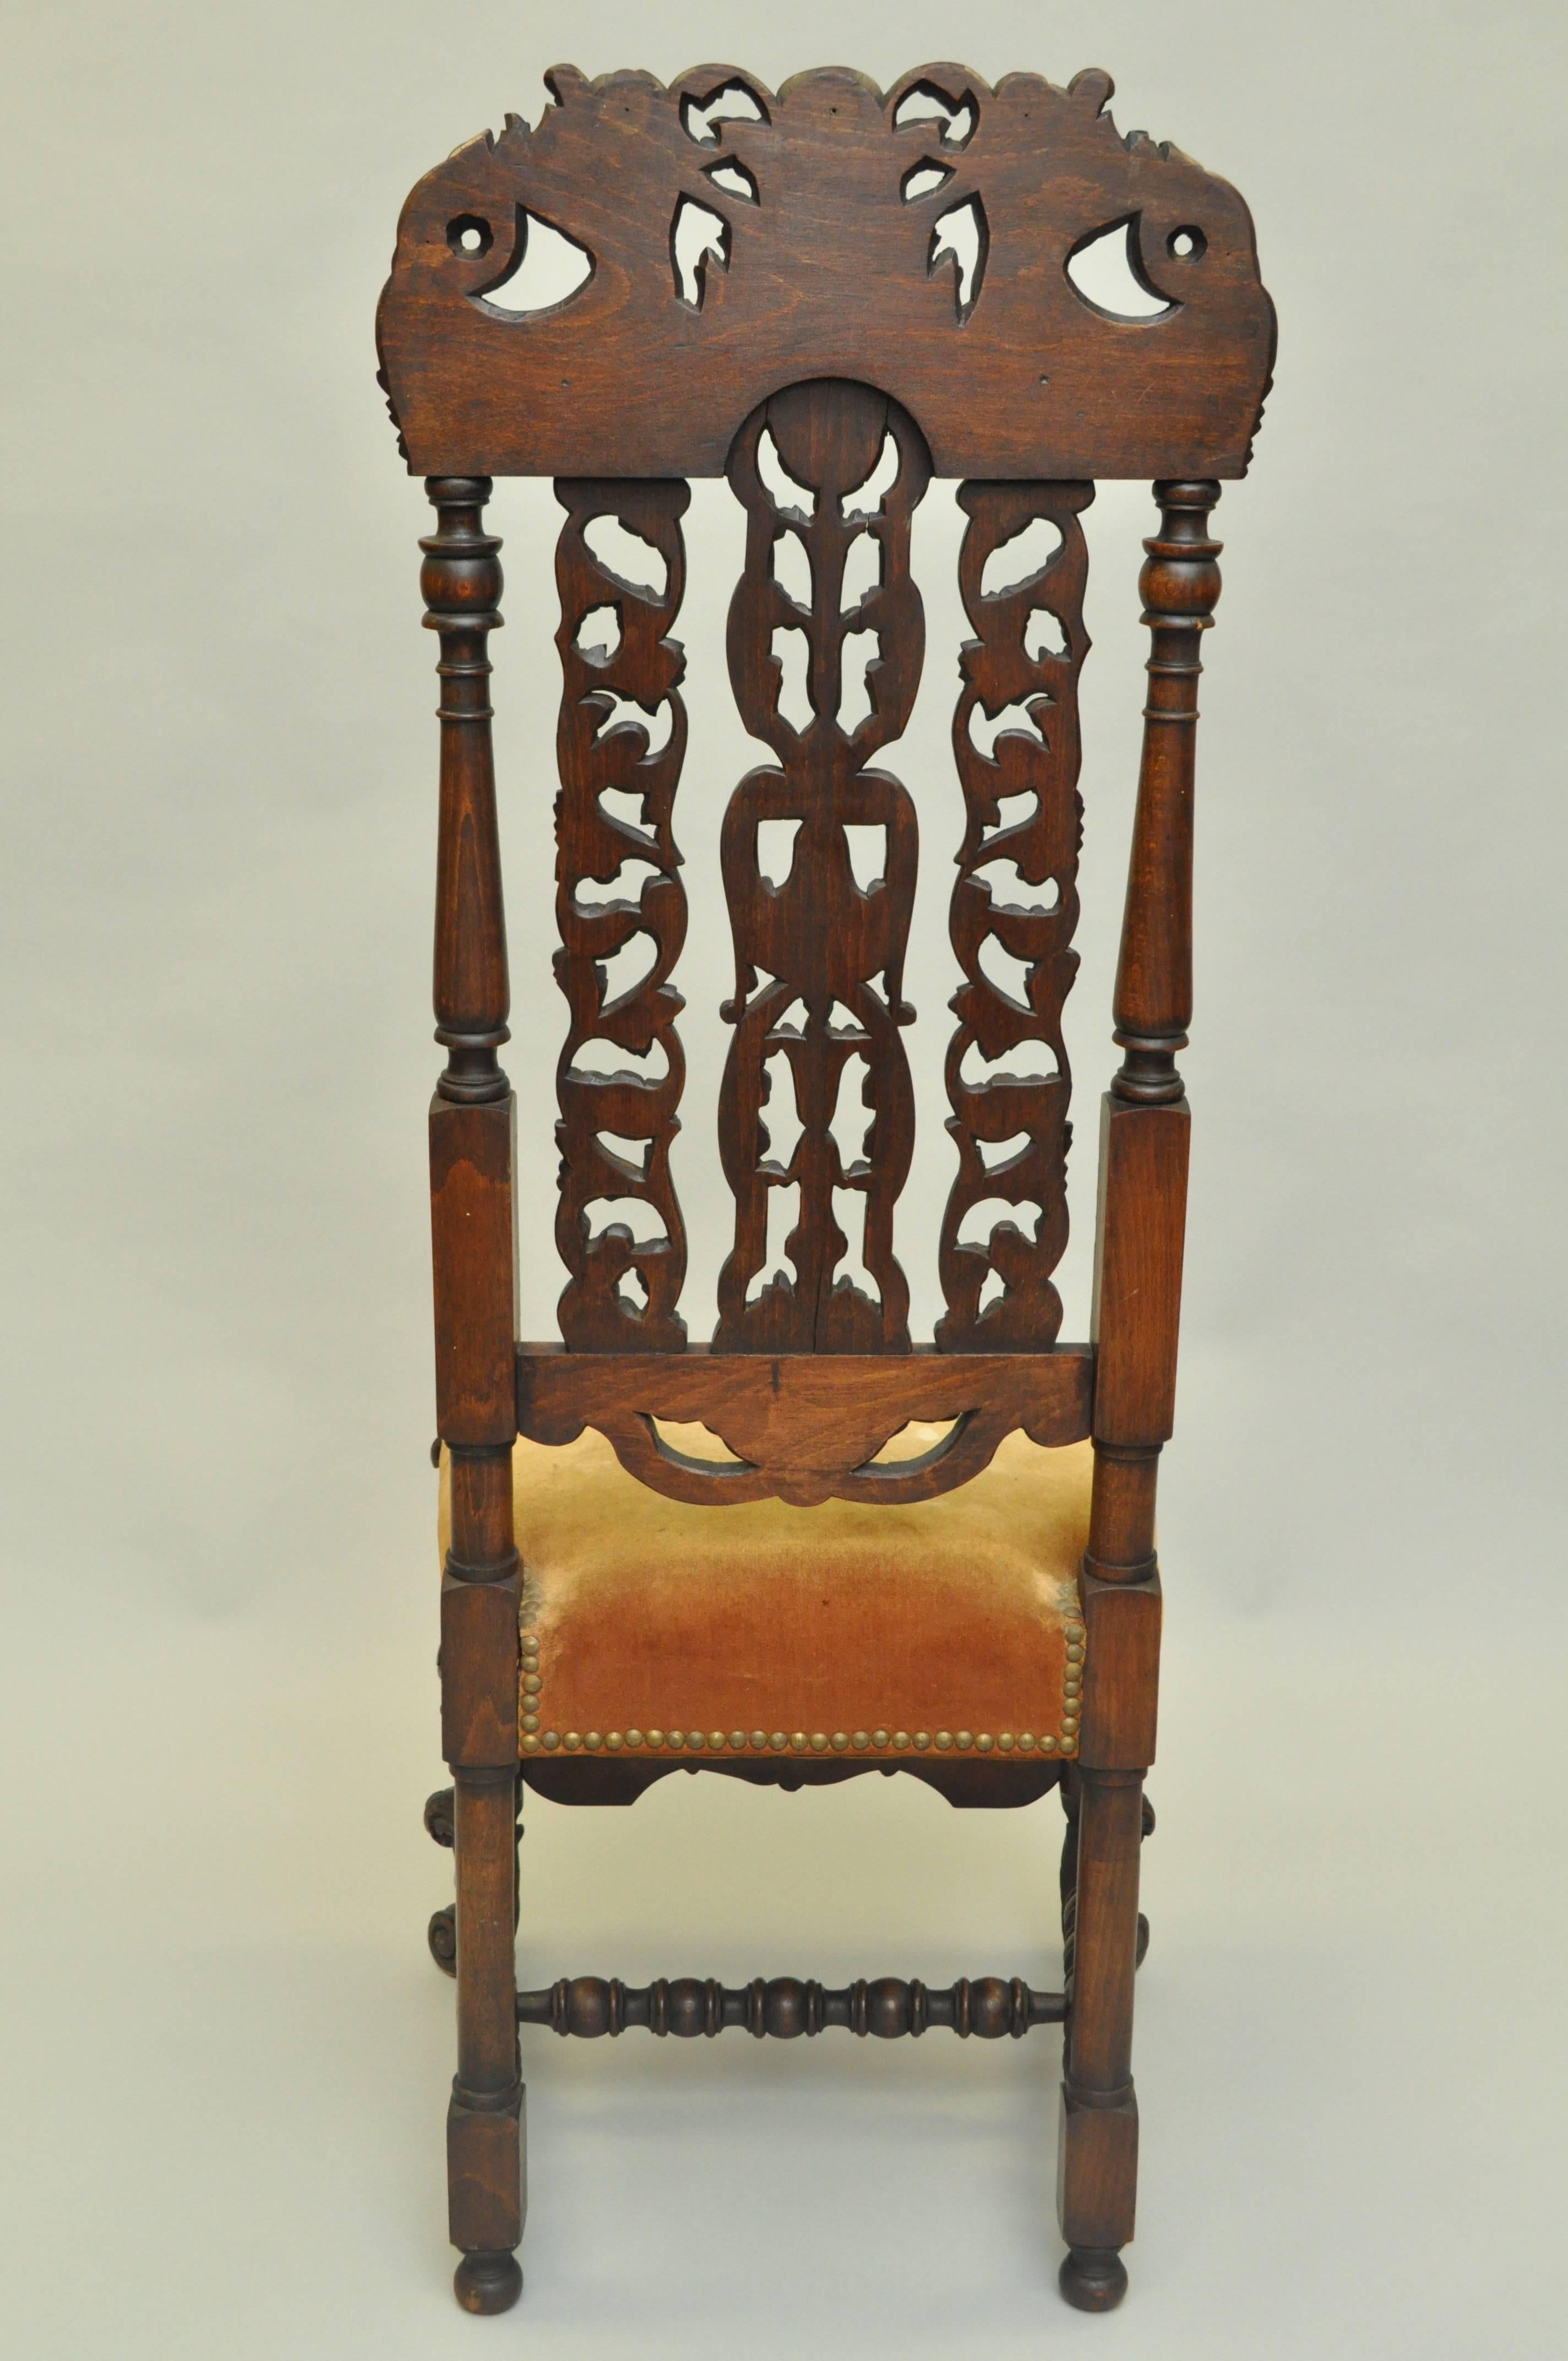 Finely Carved 19th Century Figural Walnut Italian Renaissance Tall Back Chair 4